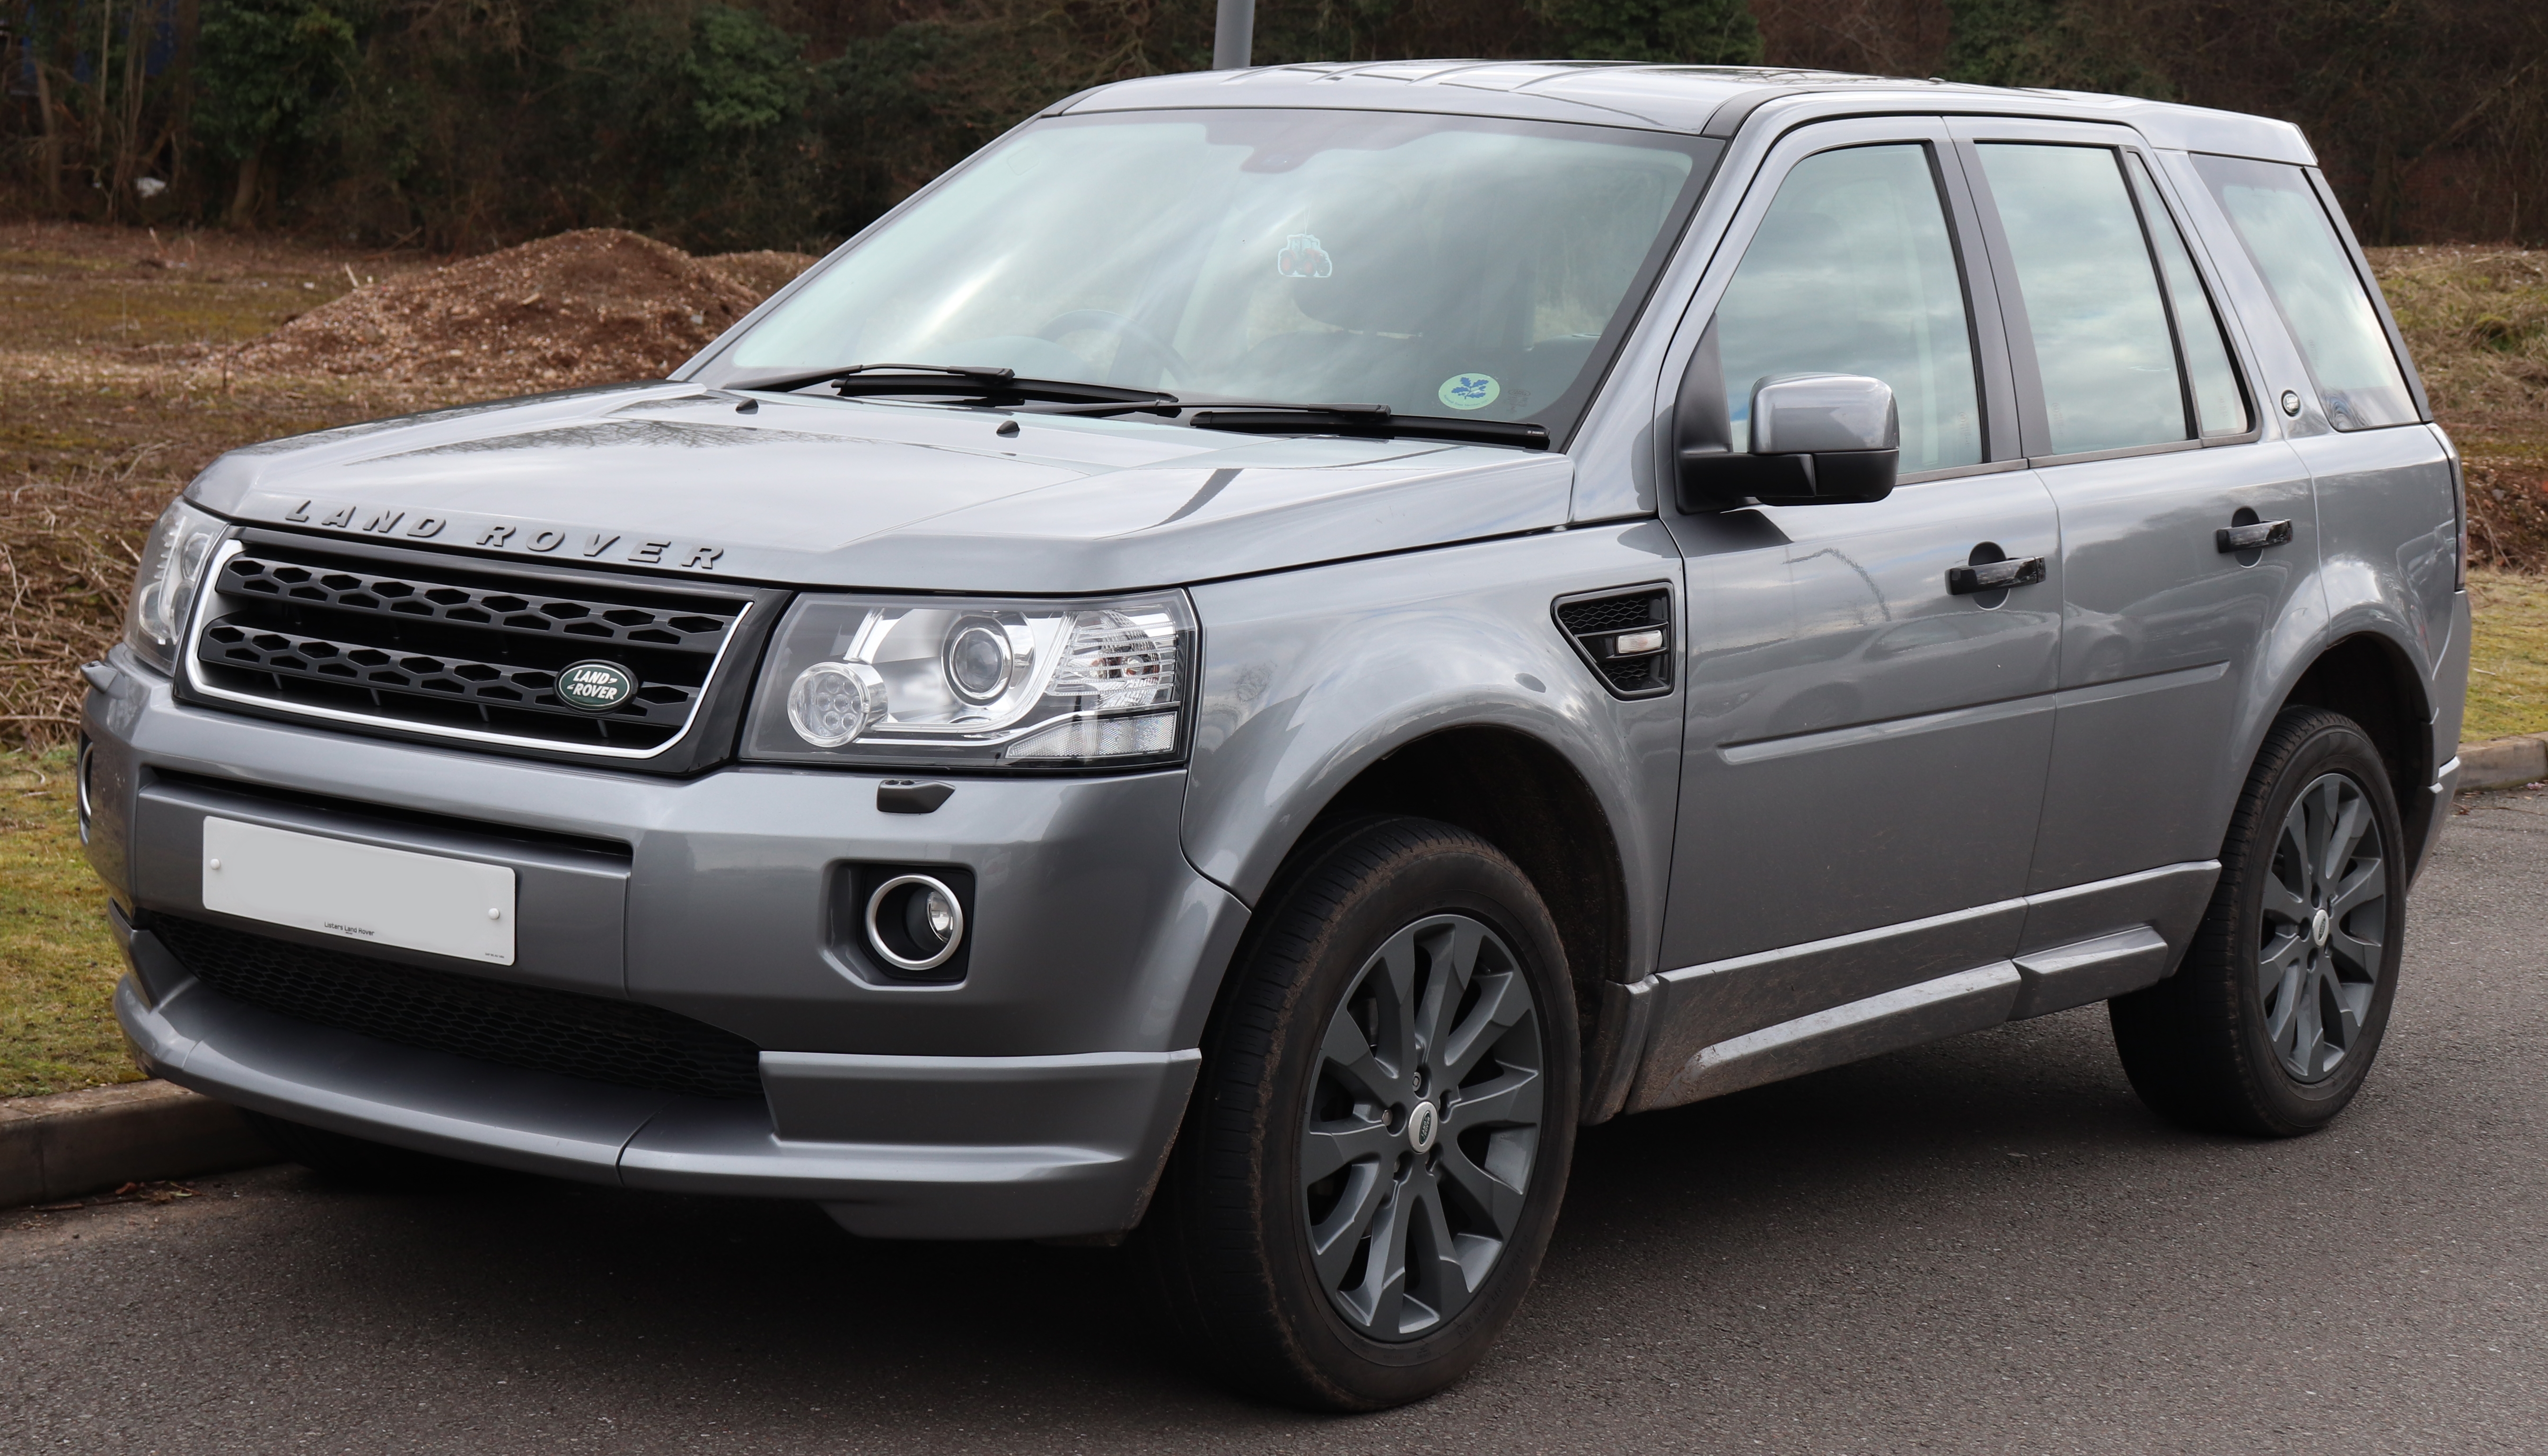 2013 Land Rover Freelander Dynamic SD4 Automatic 2.2 Front